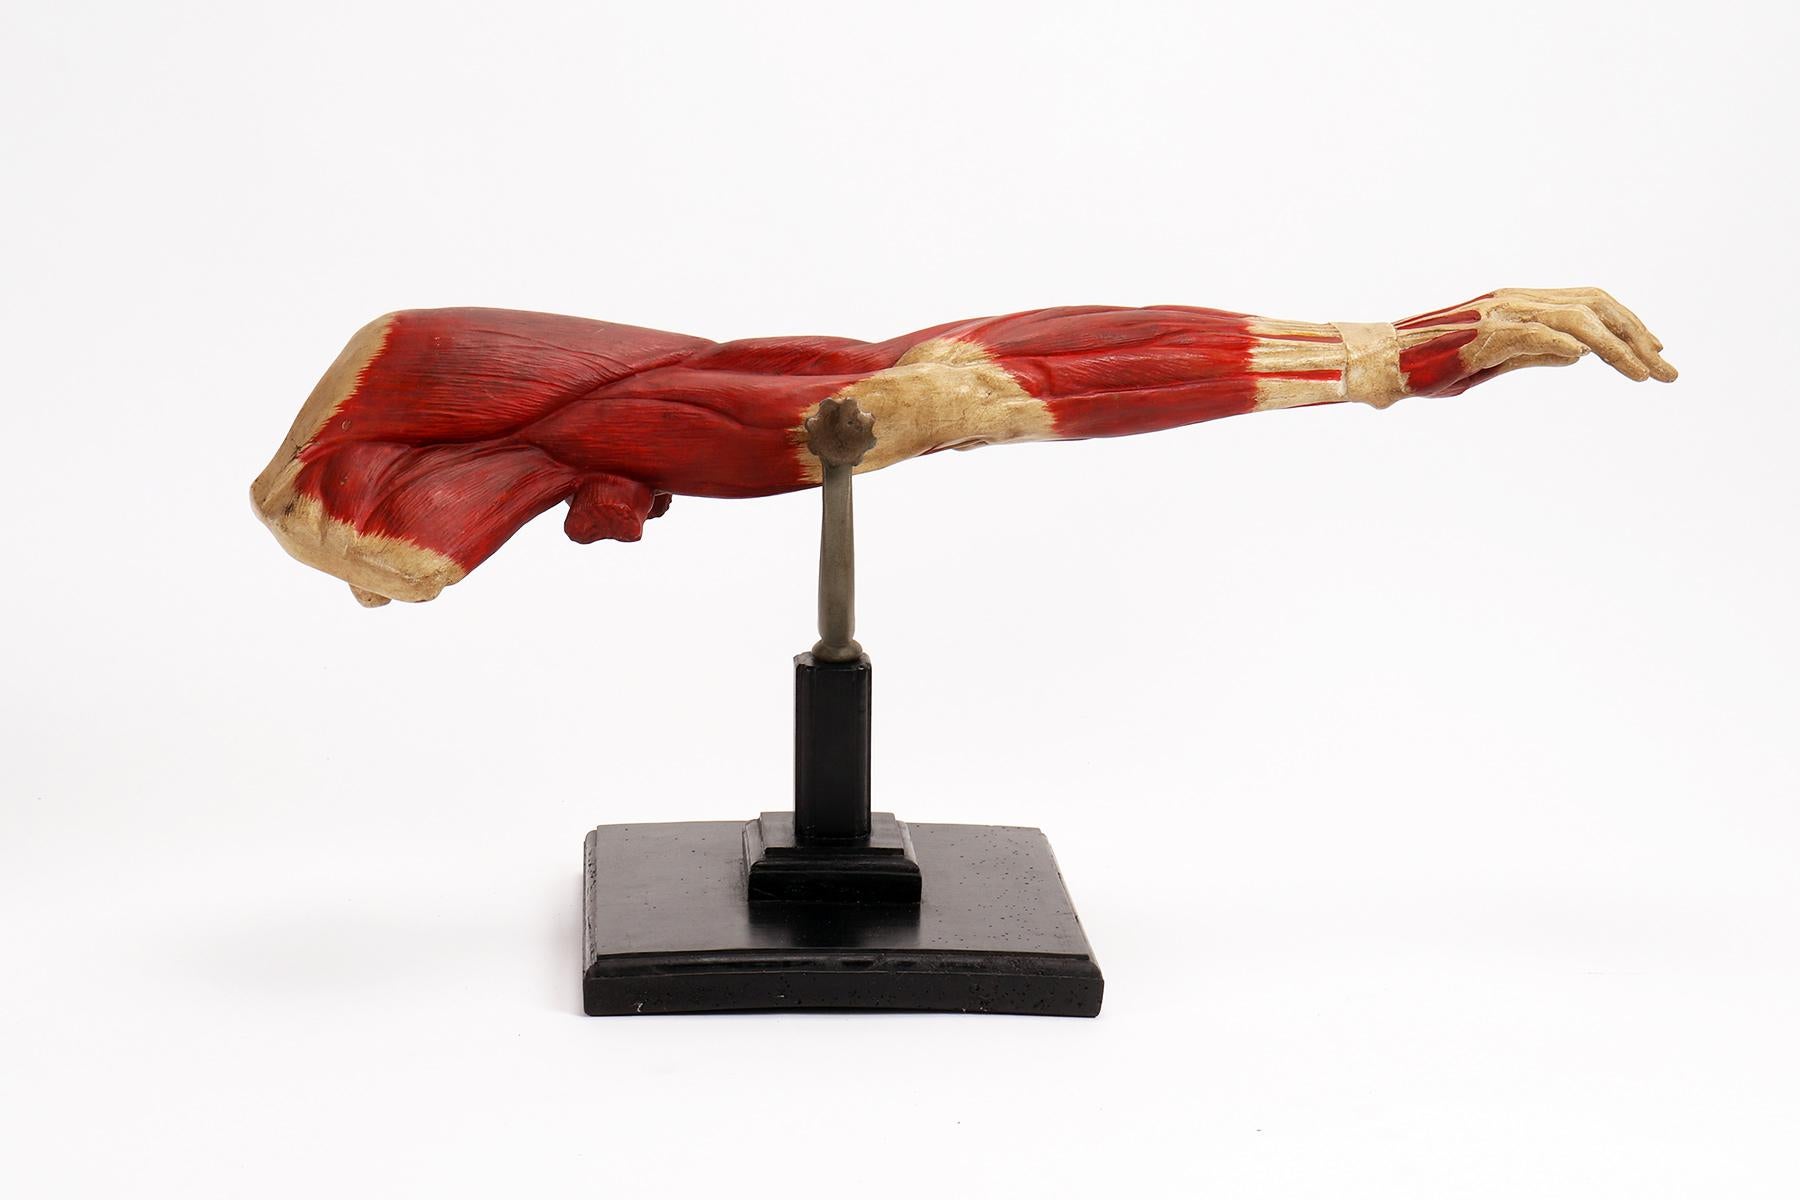 Anatomical model for schools, didactic use, depicting the upper limb tilting on a fork supported by a black lacquered wooden base.
Made in plaster and finished entirely in colour. For didactic practicality, the limb is hinged to tilt, supported by